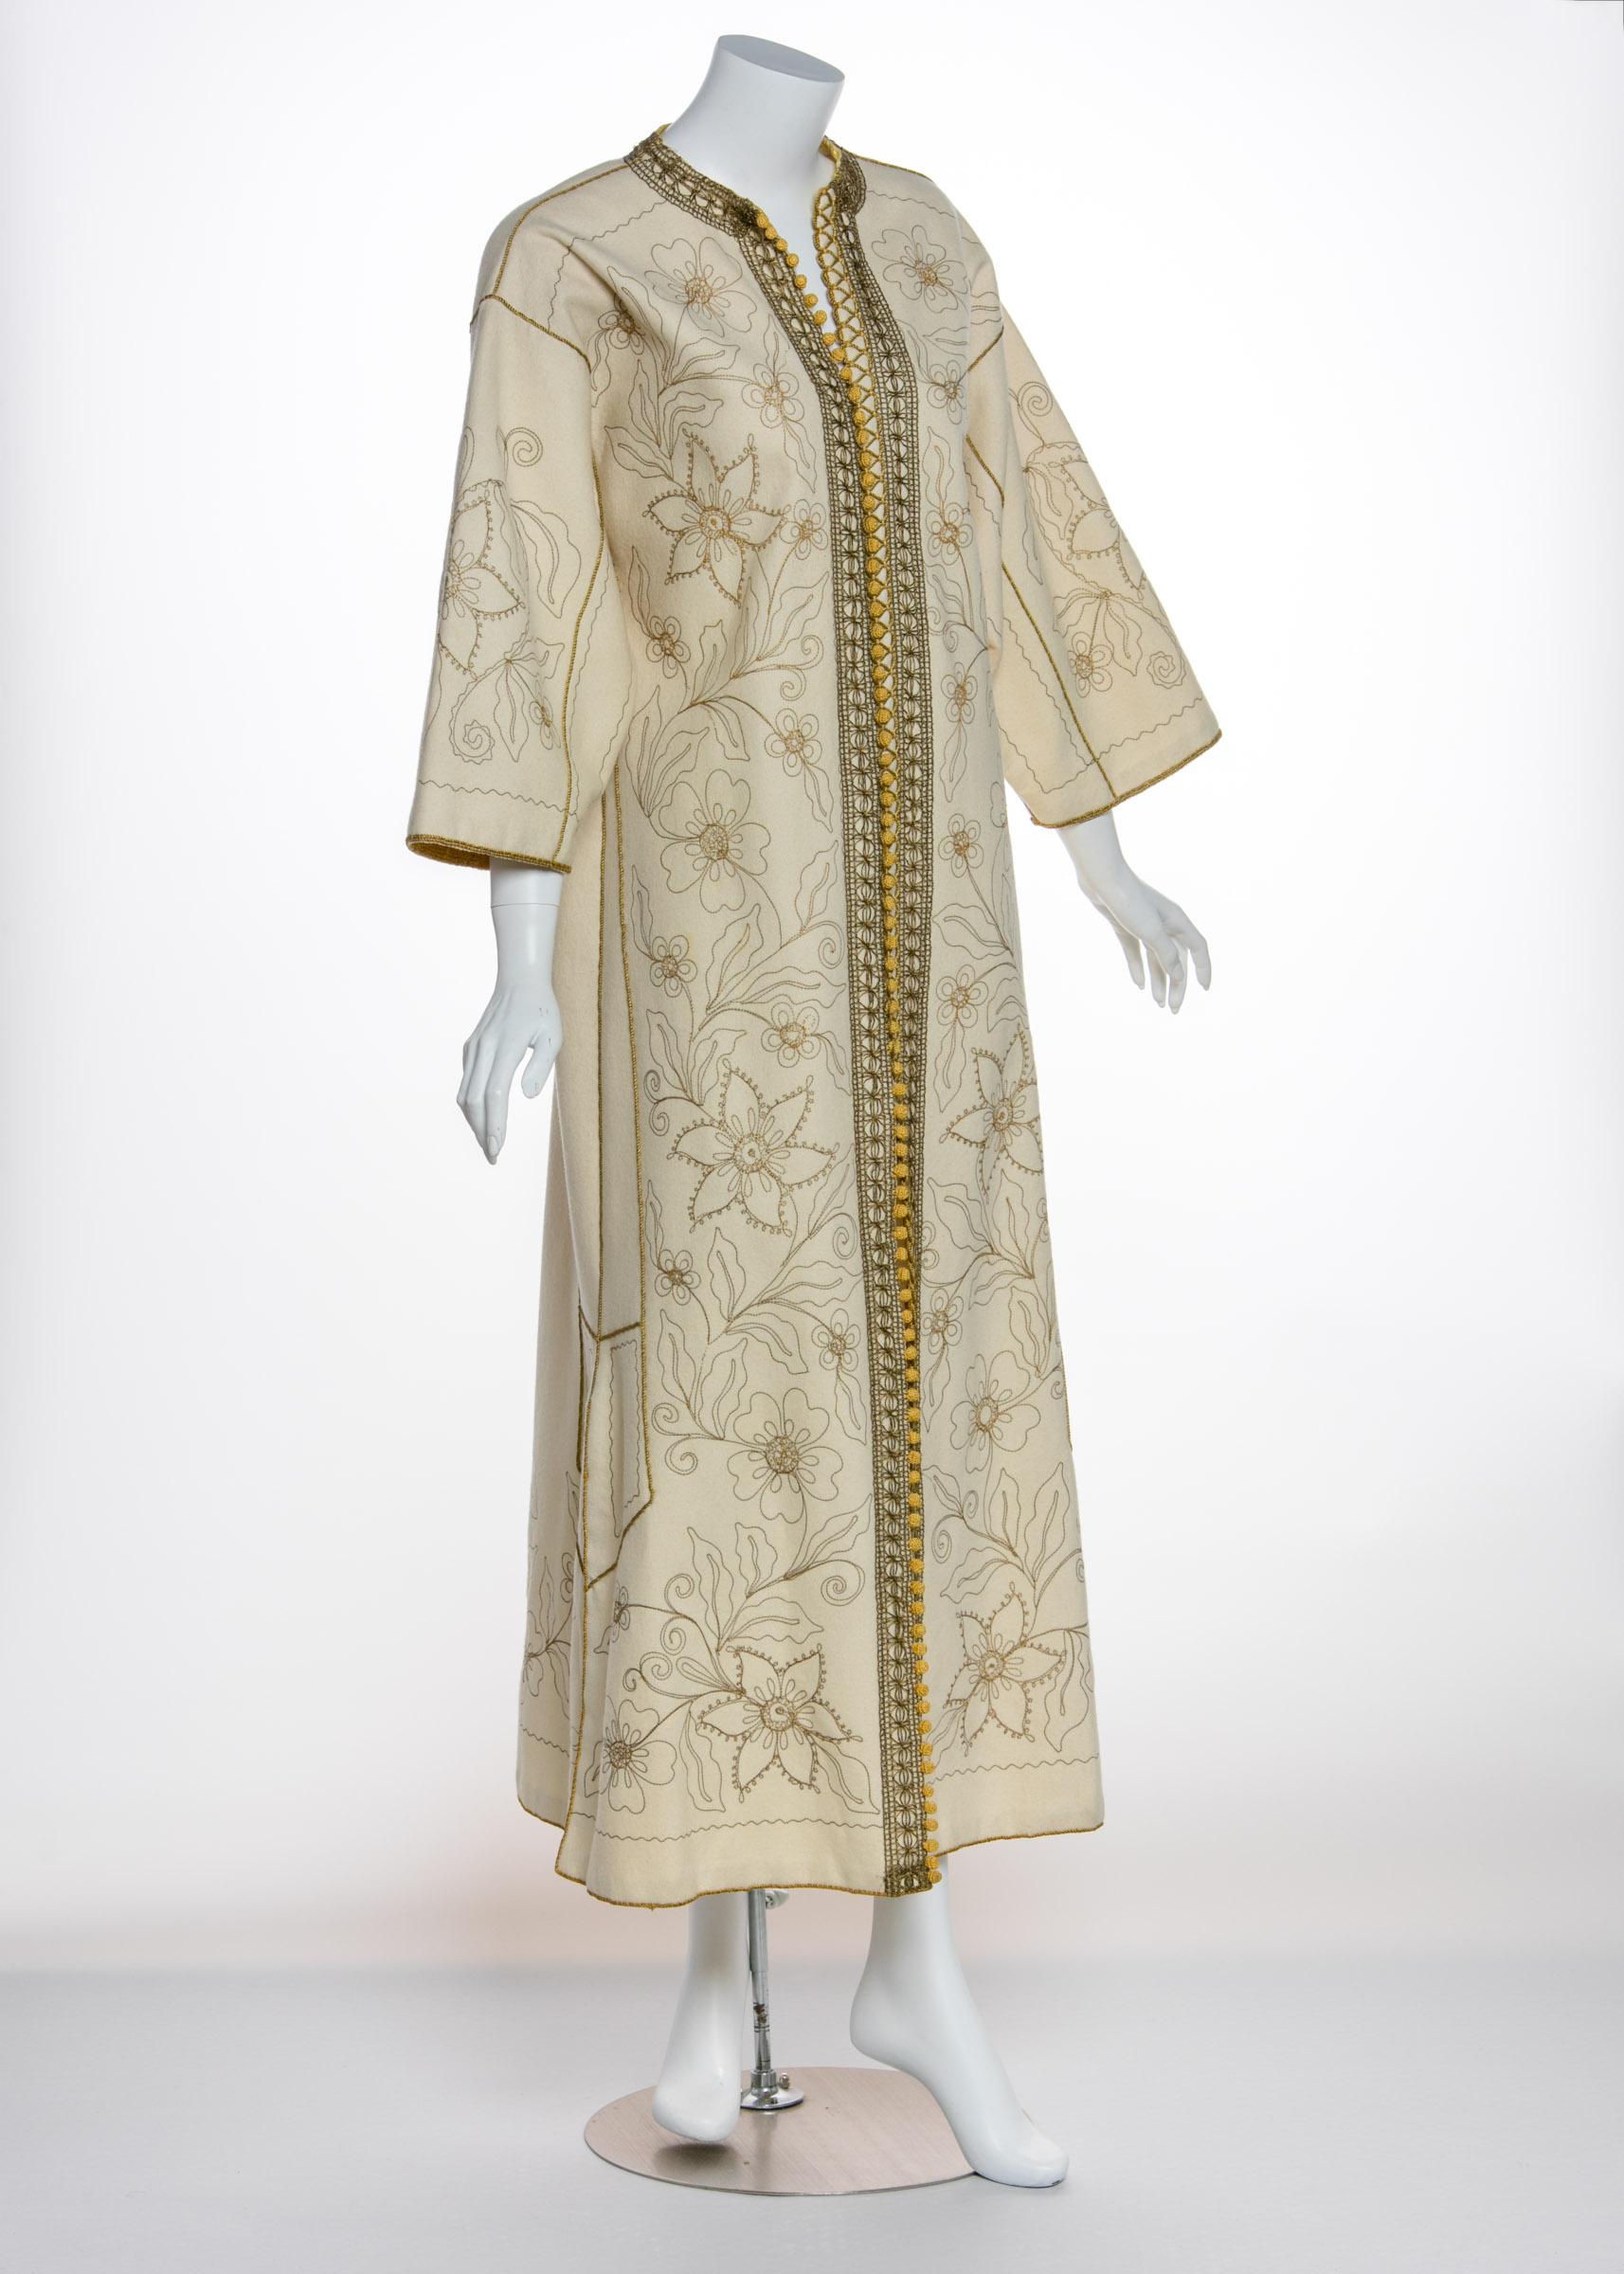 The kaftan is a garment traditionally found in the Middle East and near surrounding regions. Originally it was worn for its immense functionality for the climate and the day-to-day activities of the resident cultures. Here, this ivory wool kaftan,